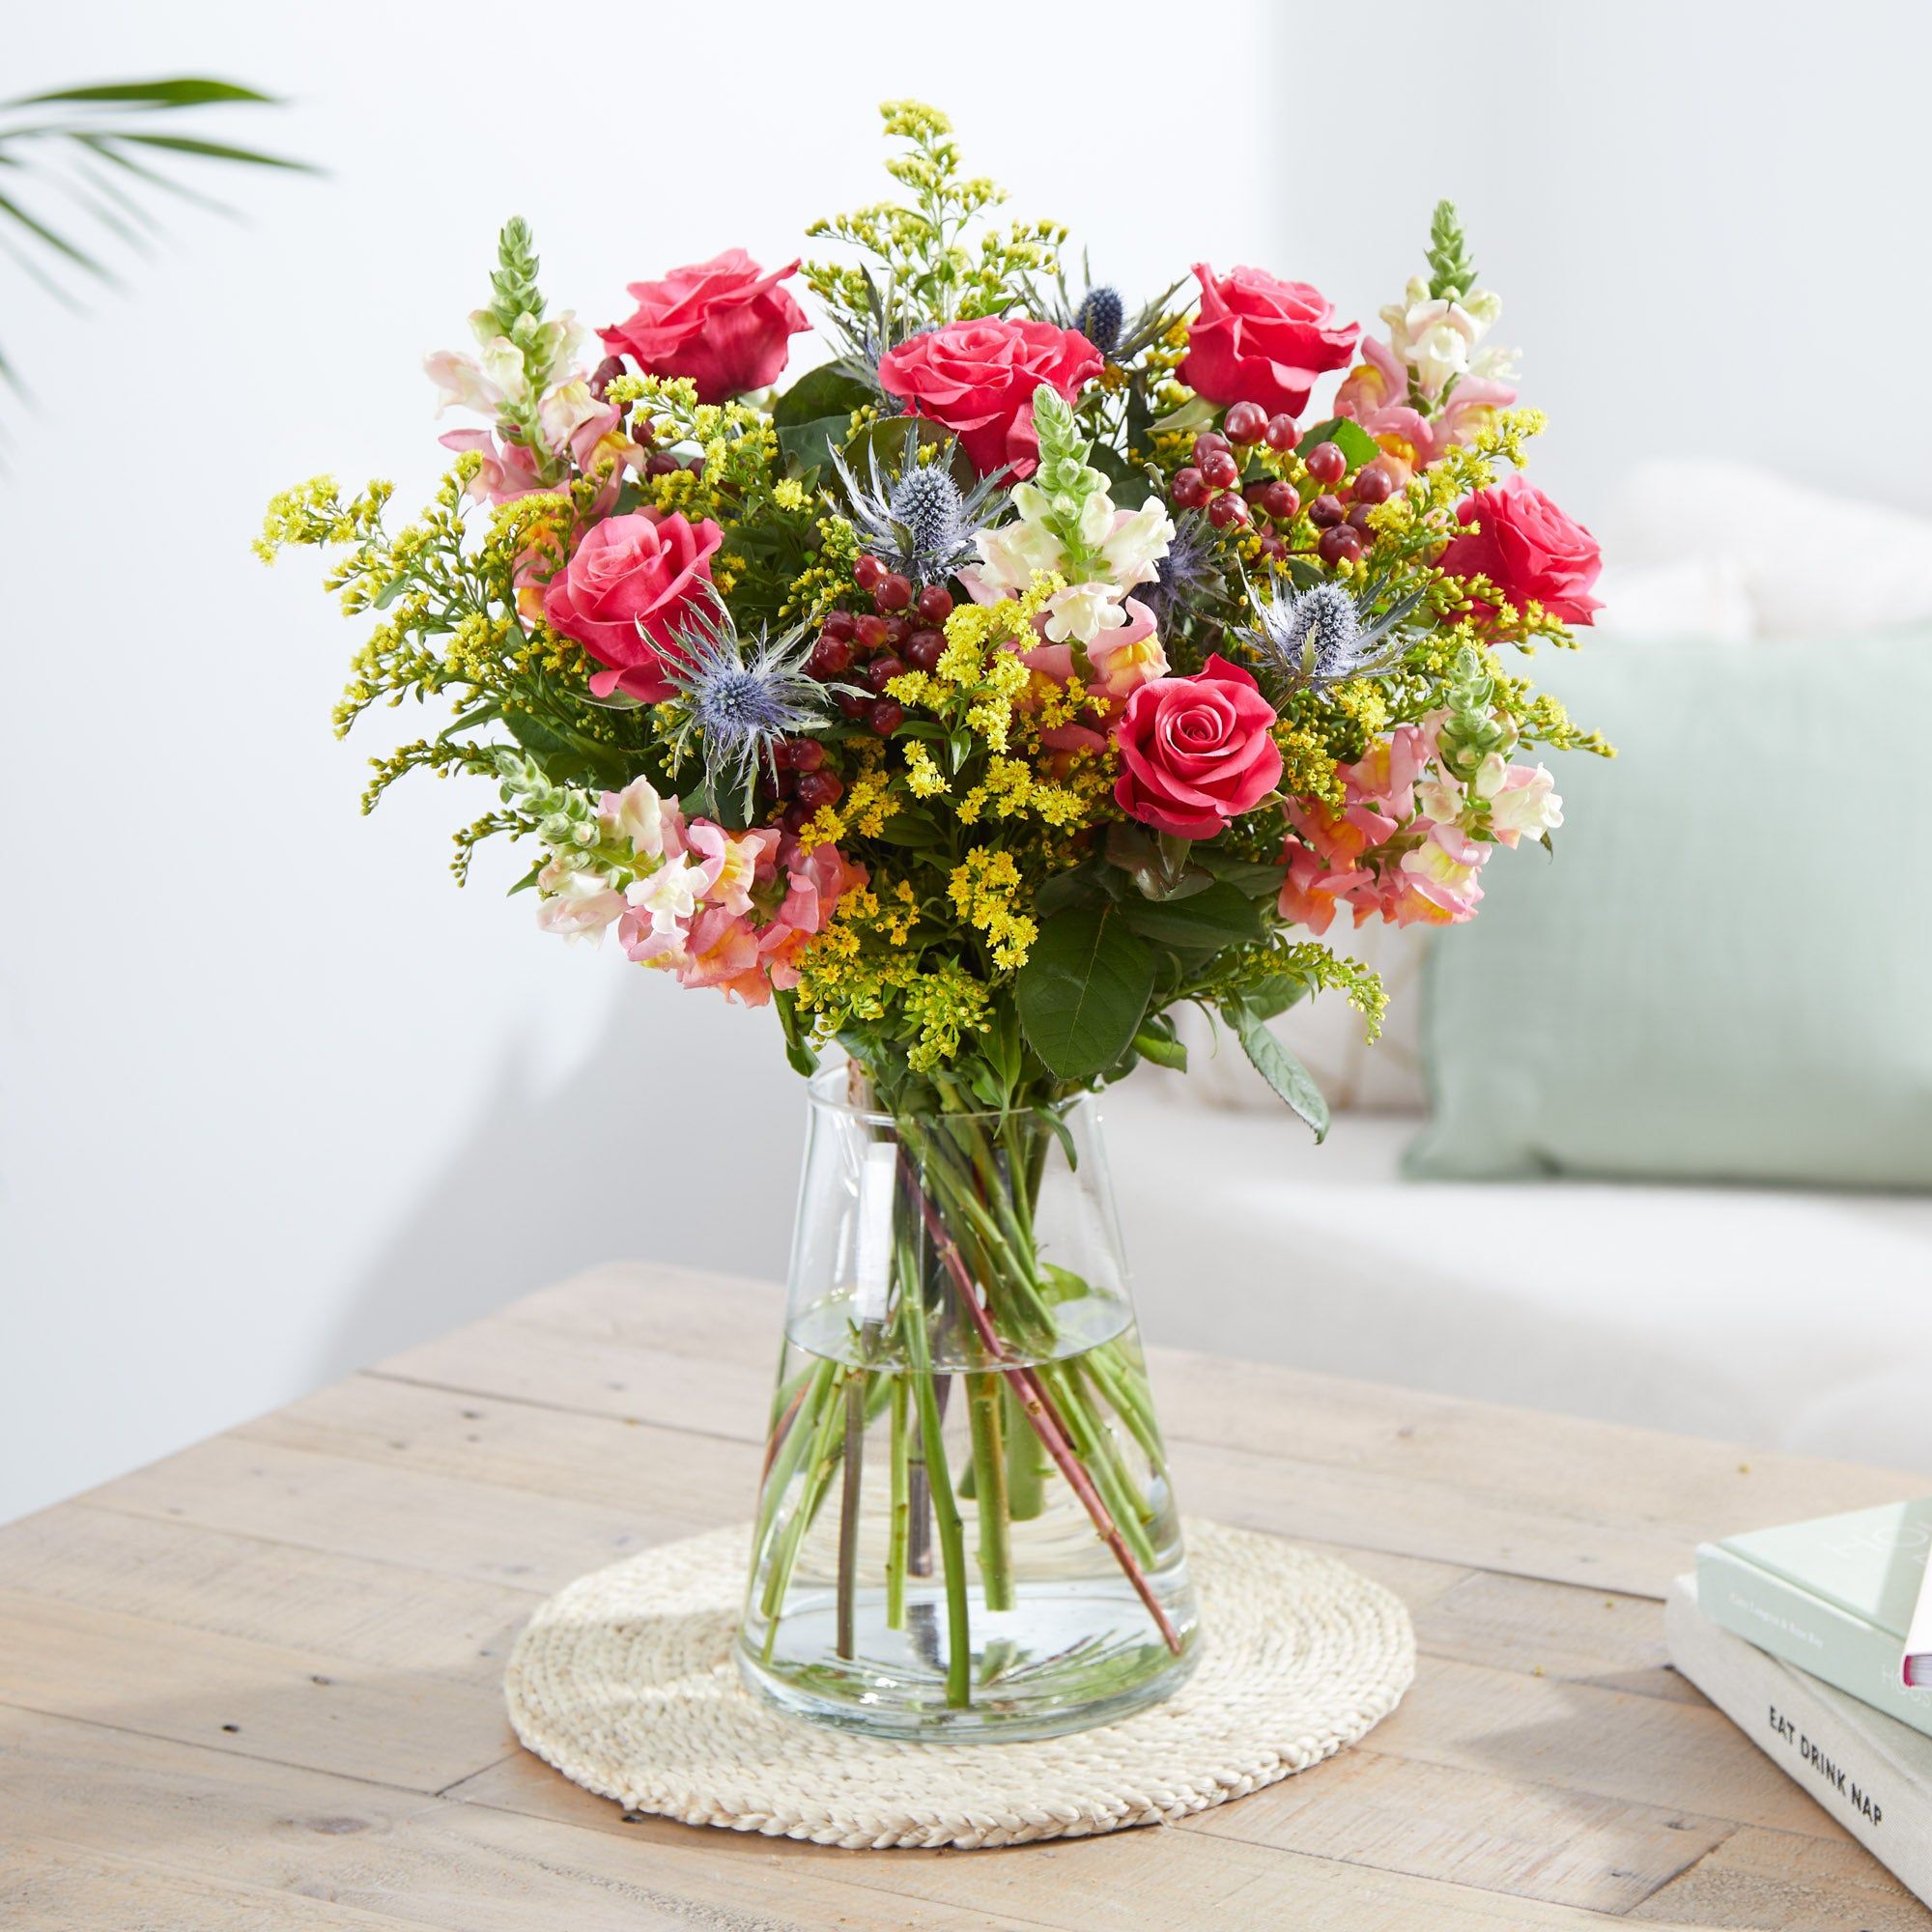 Send our 'Wild at Heart' bouquet | ethical flowers | Arena Flowers